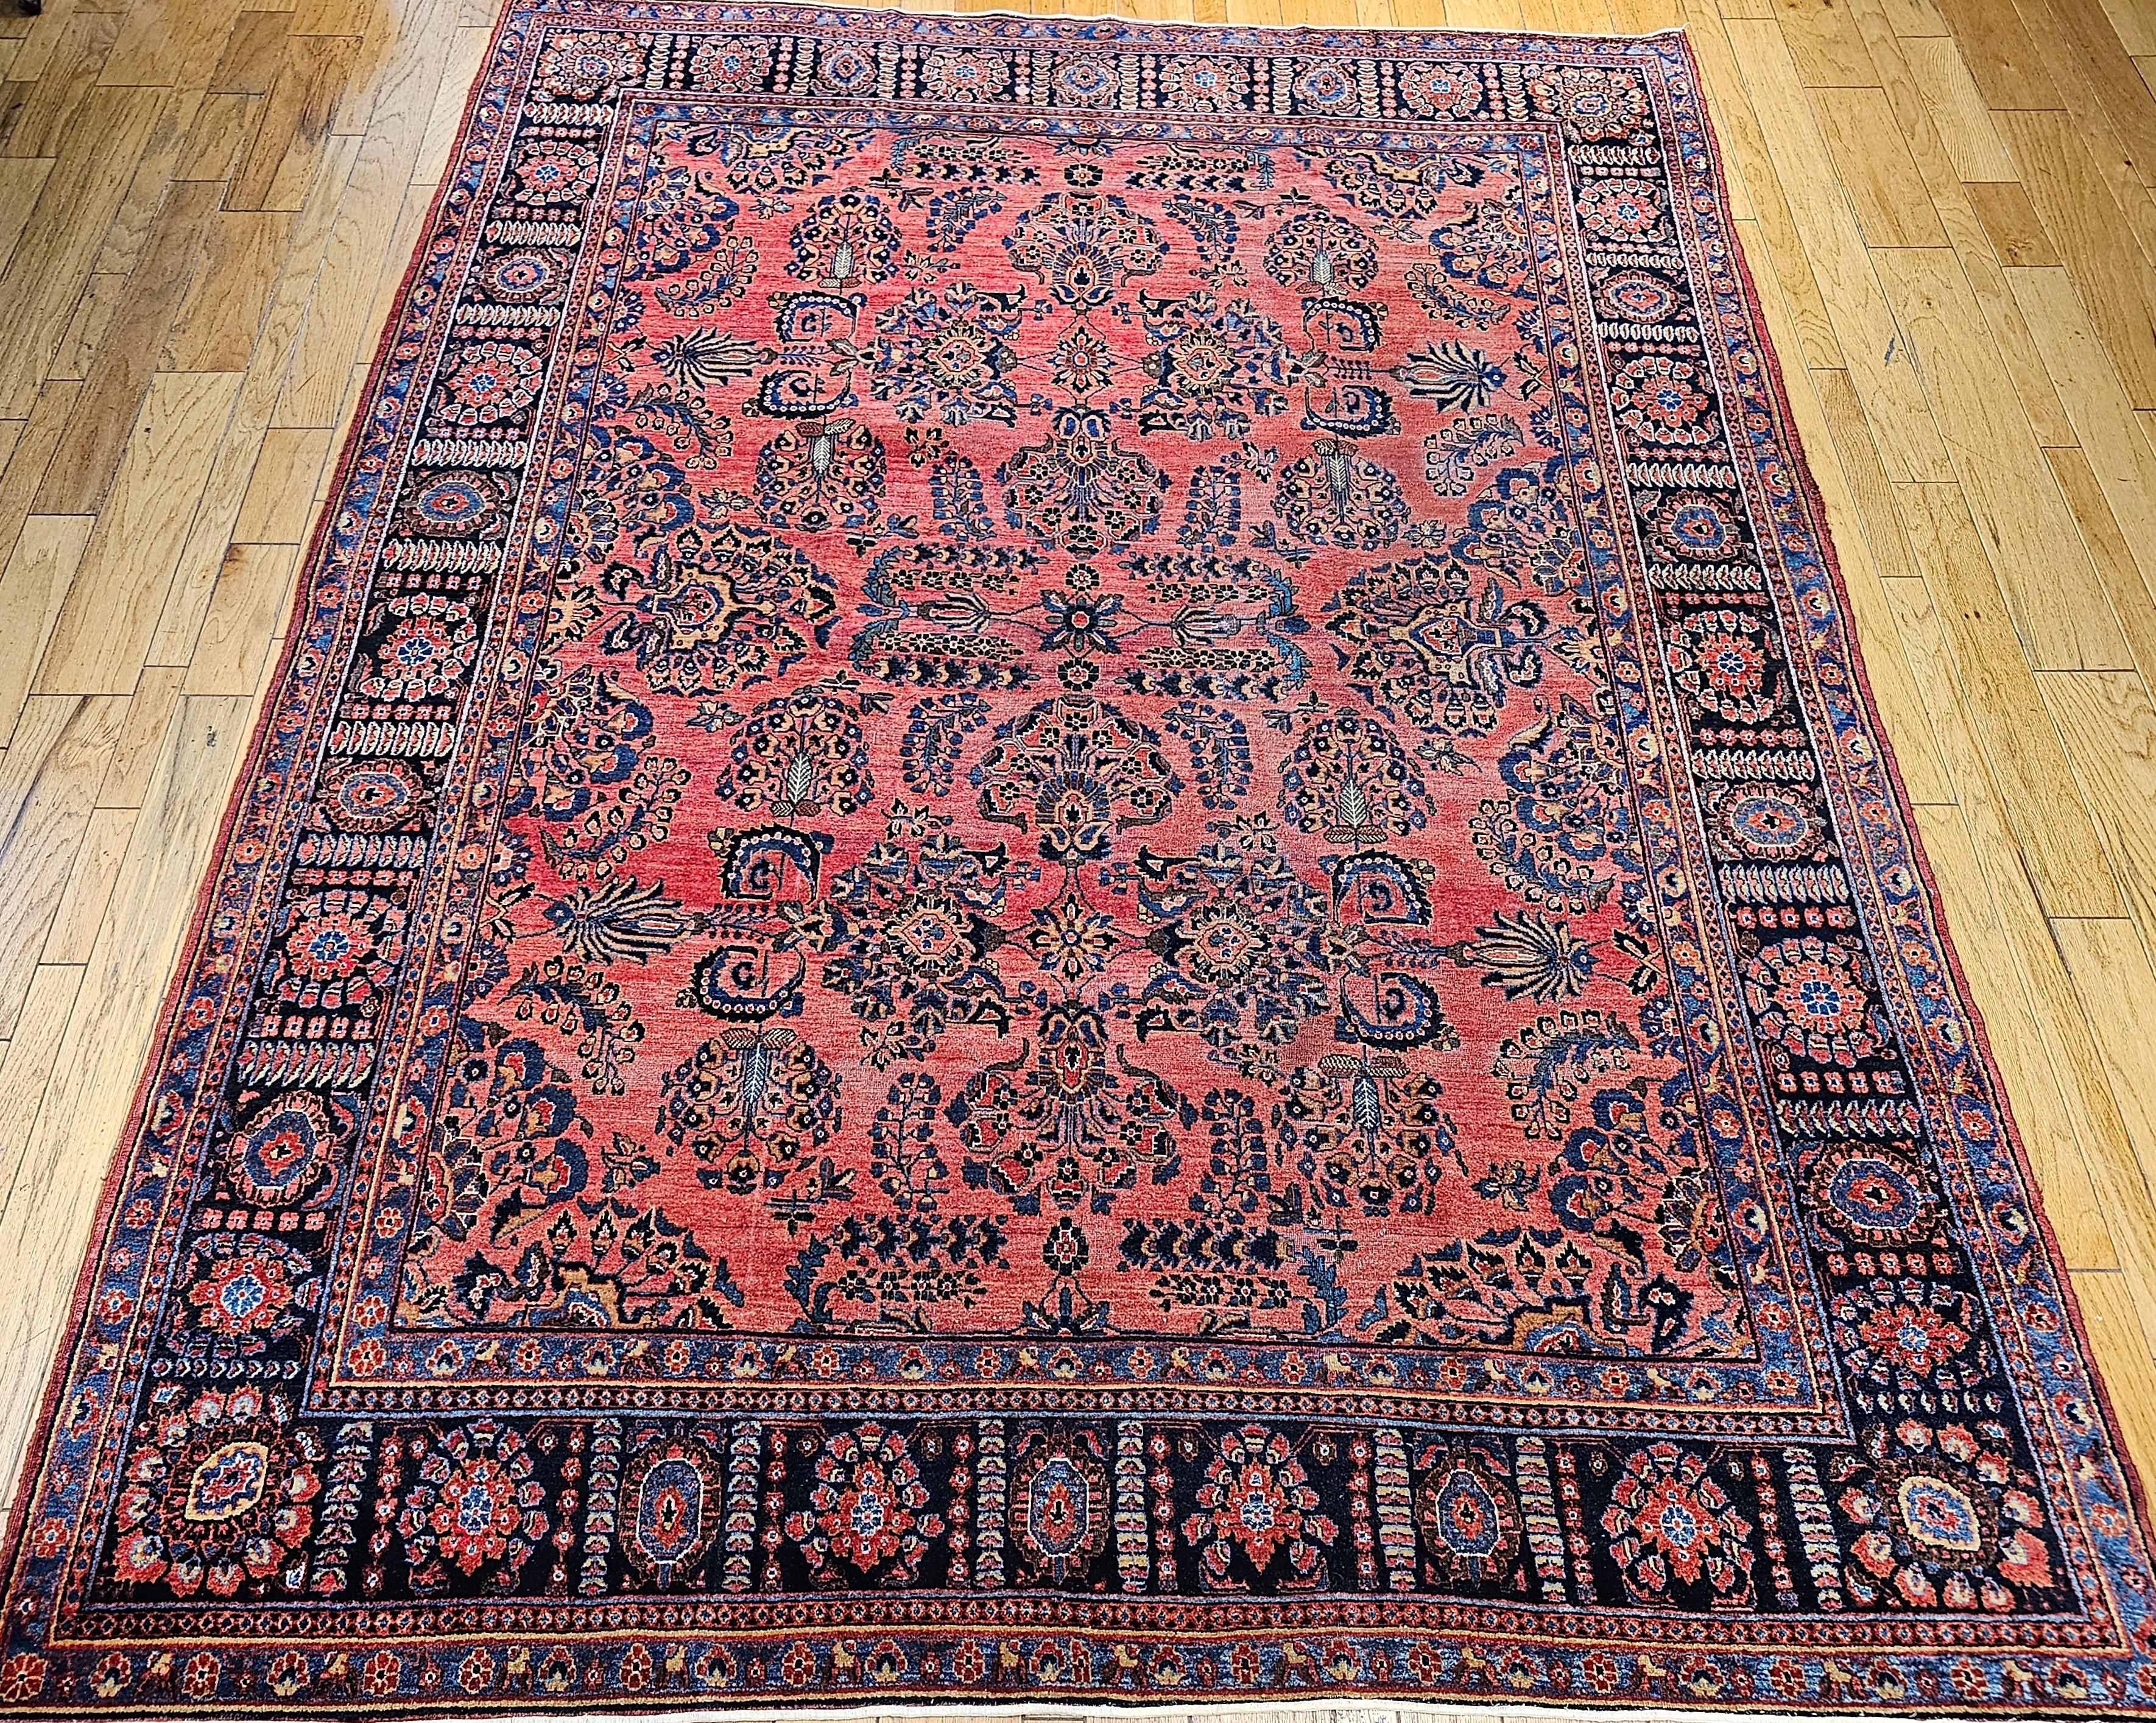 Vintage Persian Sarouk in Allover Pattern in Dark Red, French Blue, Yellow, Pink 12